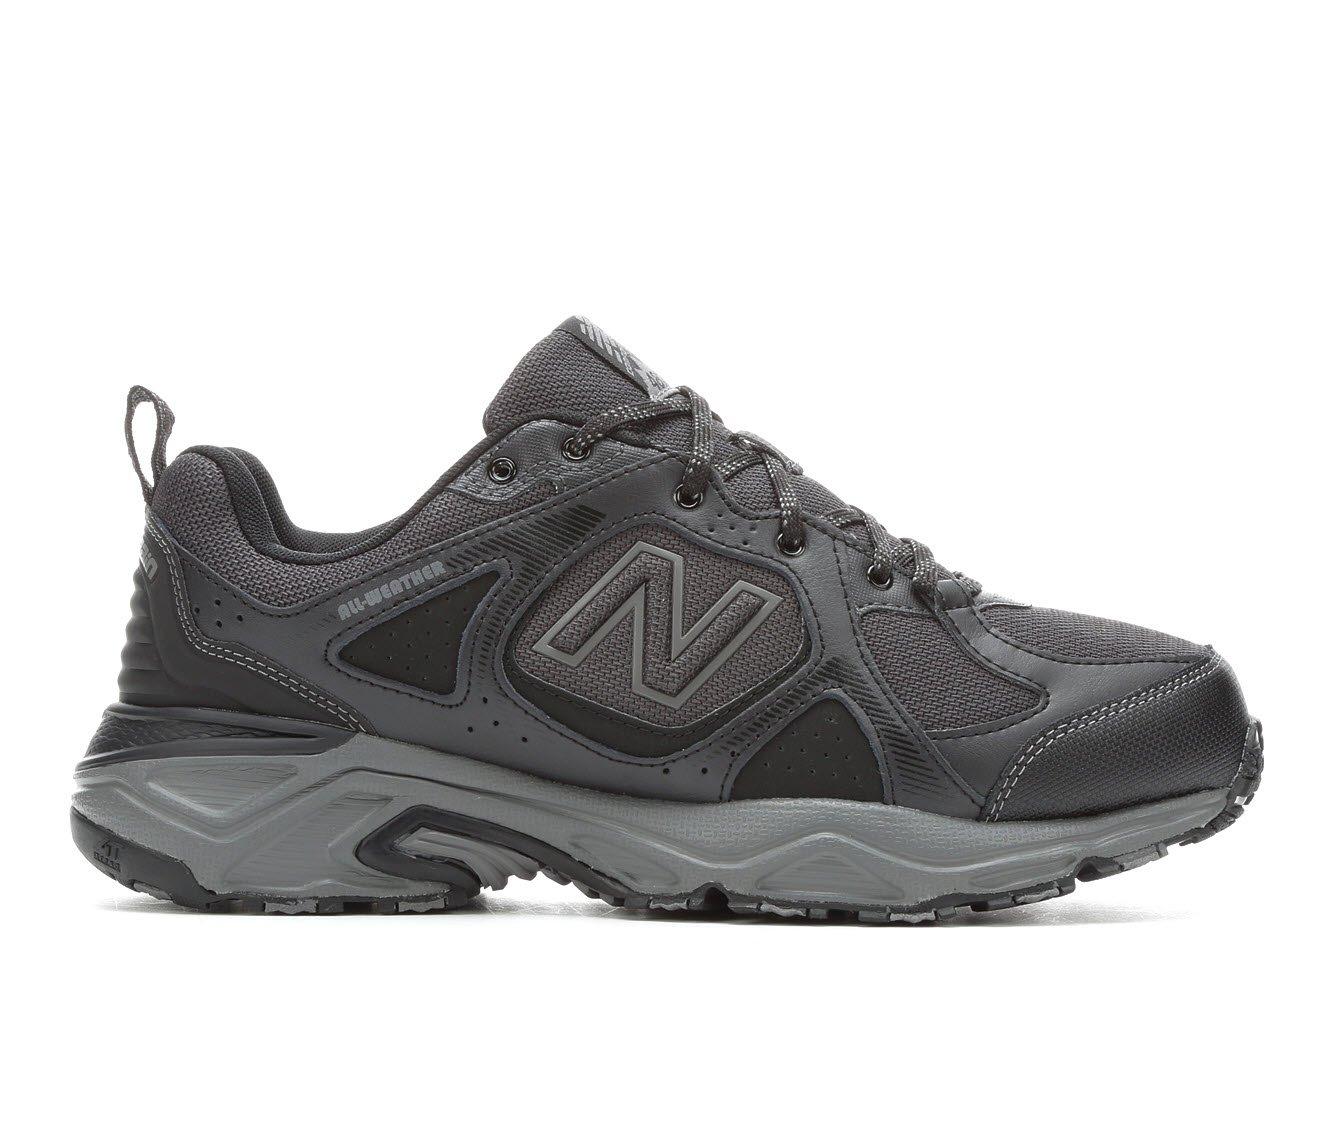 Men's New Balance MT481 Weatherized Trail Running Shoes | Shoe Carnival